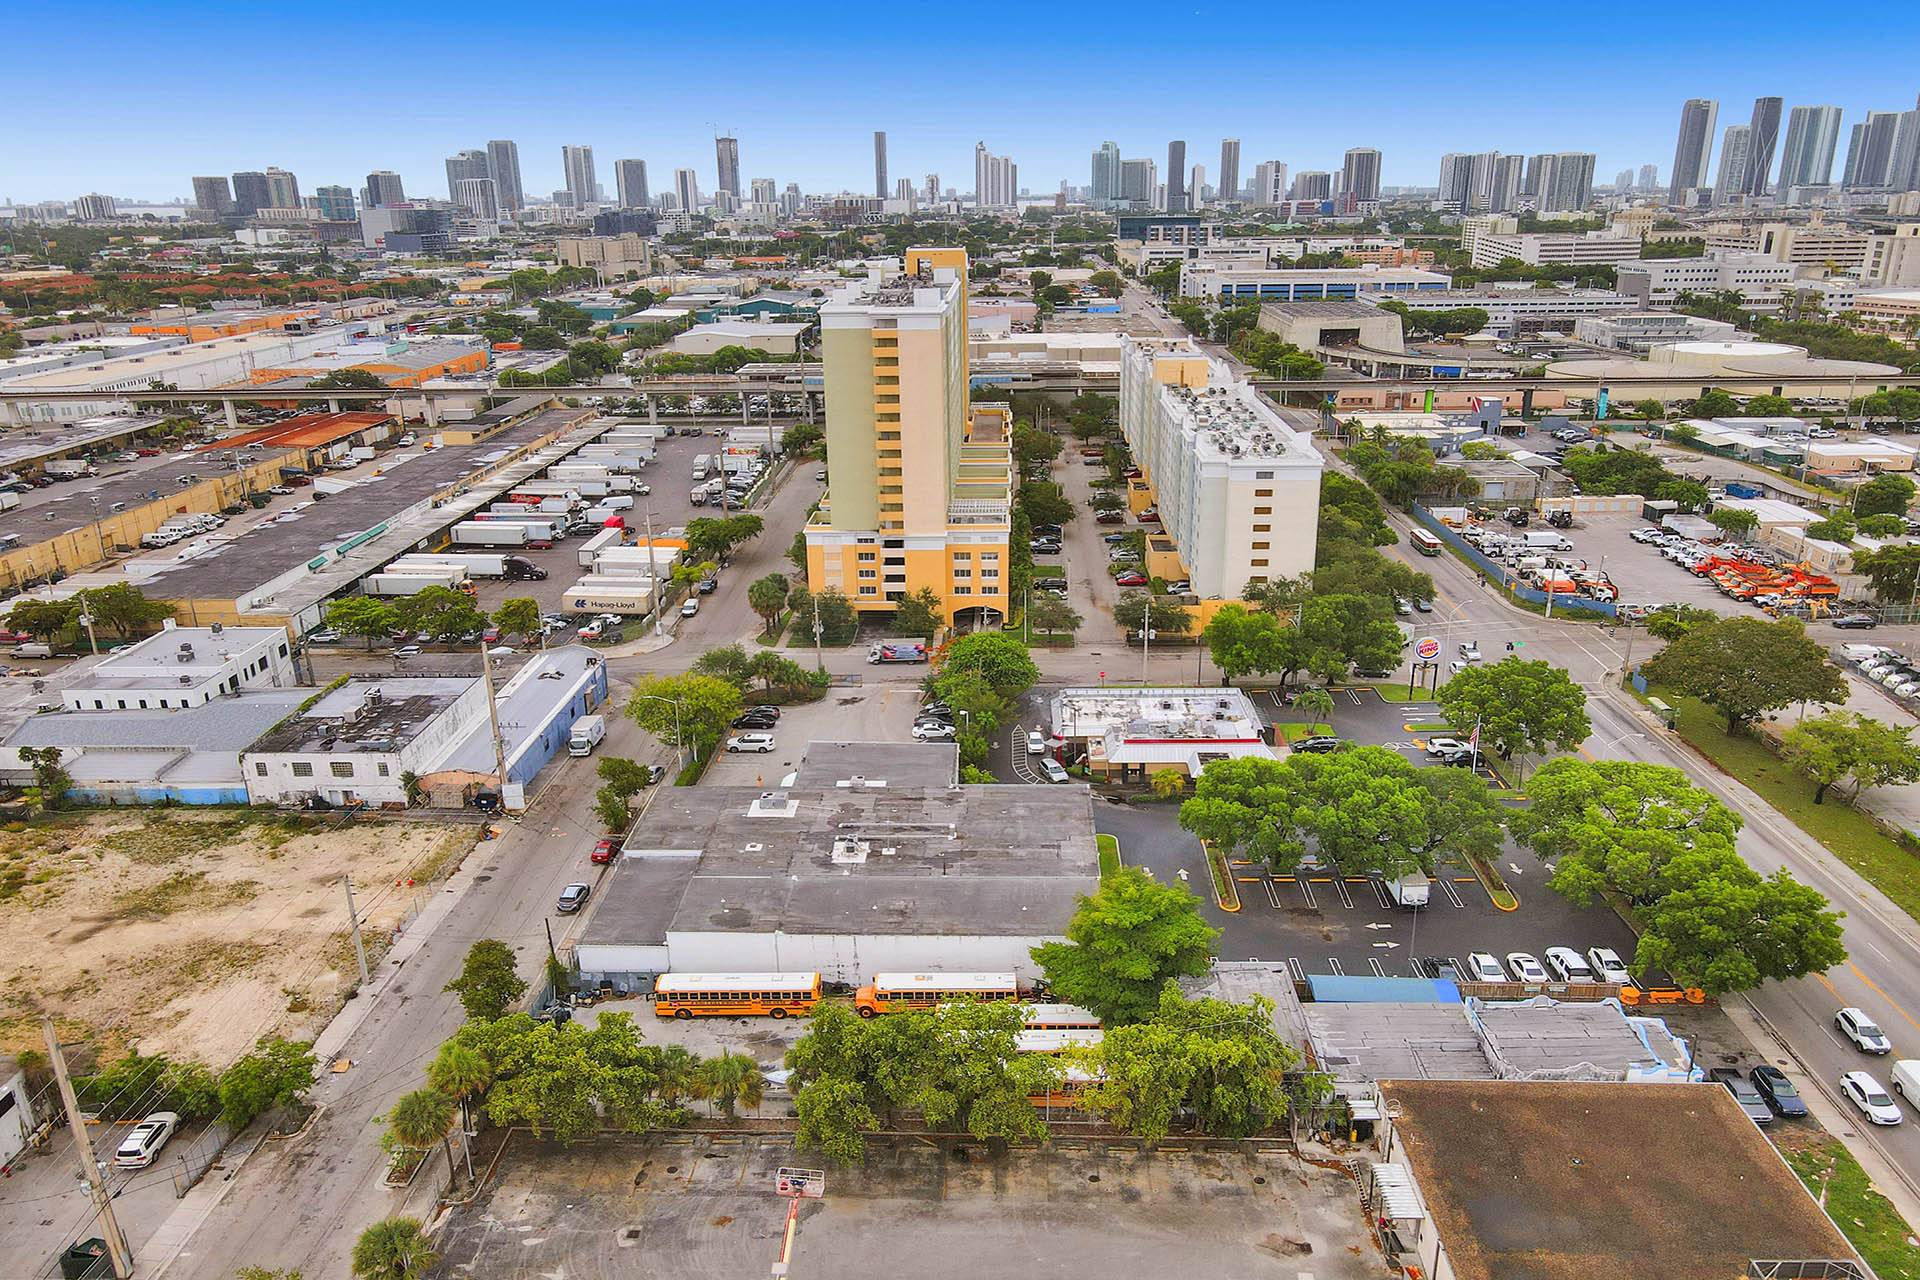 Vacant Lot in quickly developing Miami area, close to Wynwood and Health District